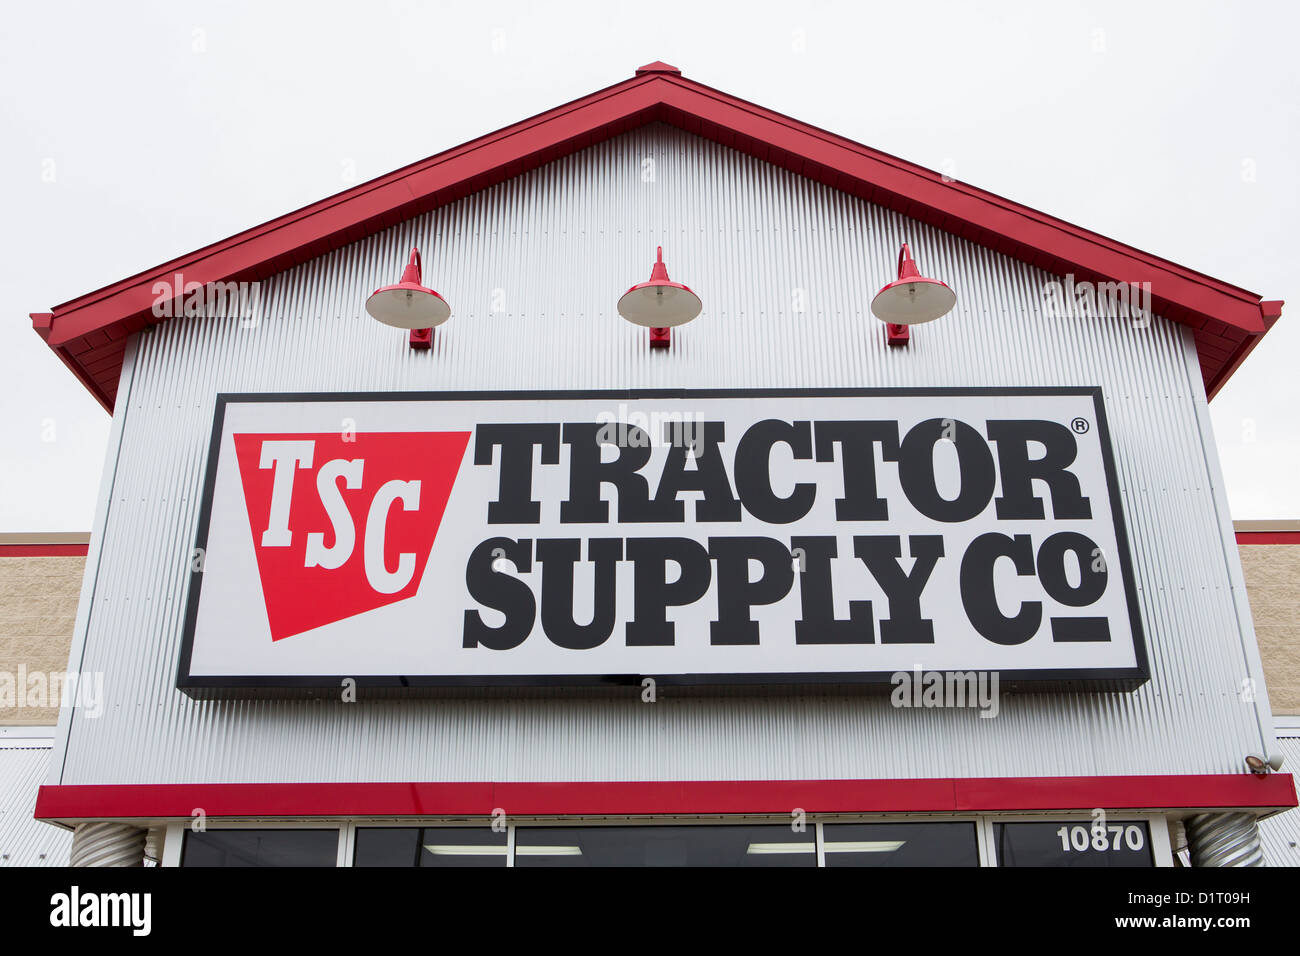 A Tractor Supply Company retail store.  Stock Photo